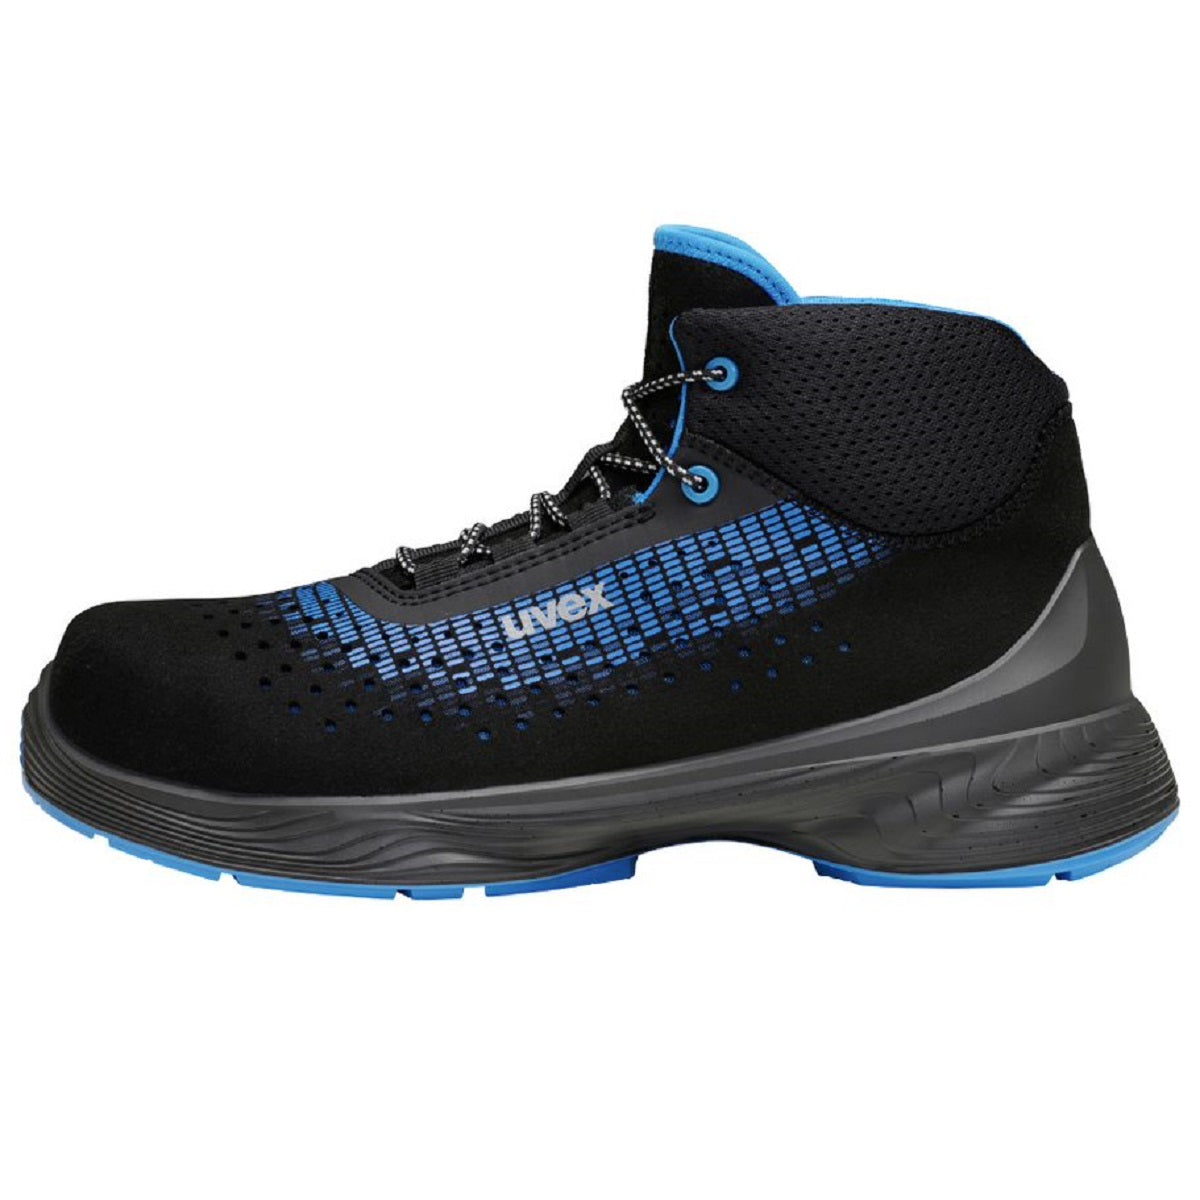 uvex 1 68381 G2 safety boots. Black Blue perforated microsuede ESD 100% Non-metal, metal-free, composite toe-cap. Comfortable uvex boots best deal at protexU